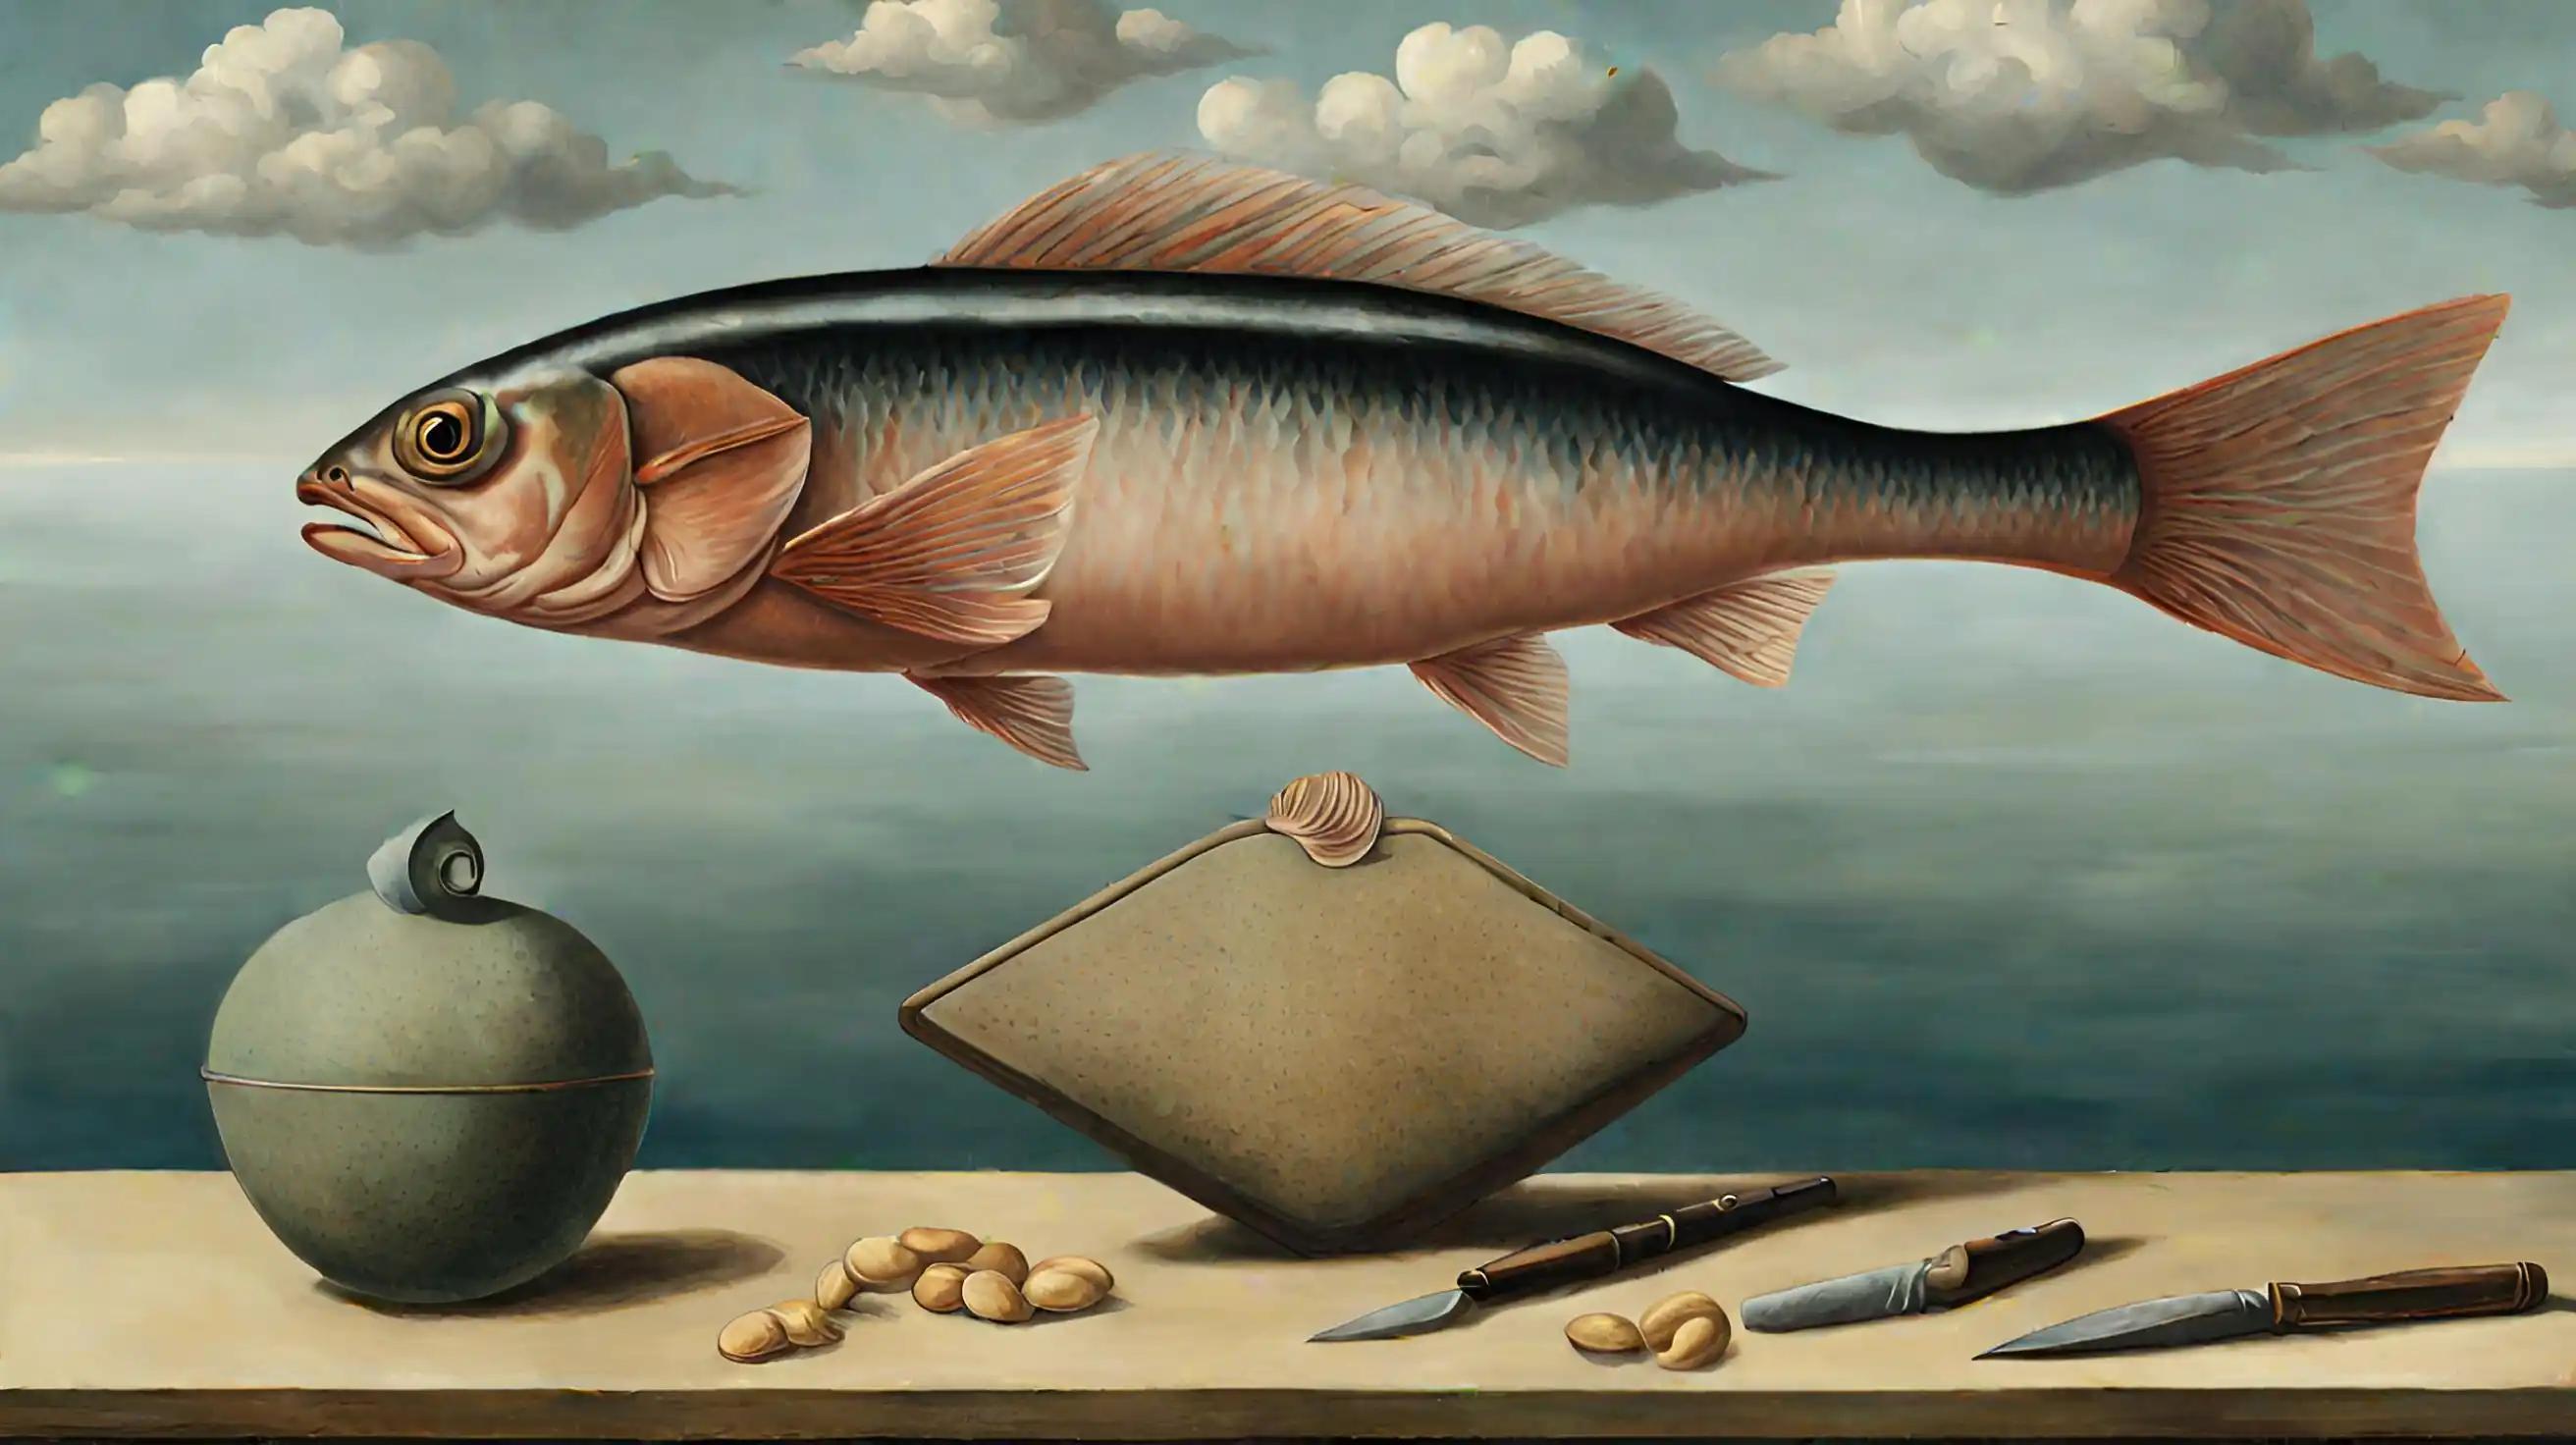 Dream of Dead Fish – What Does It Mean?